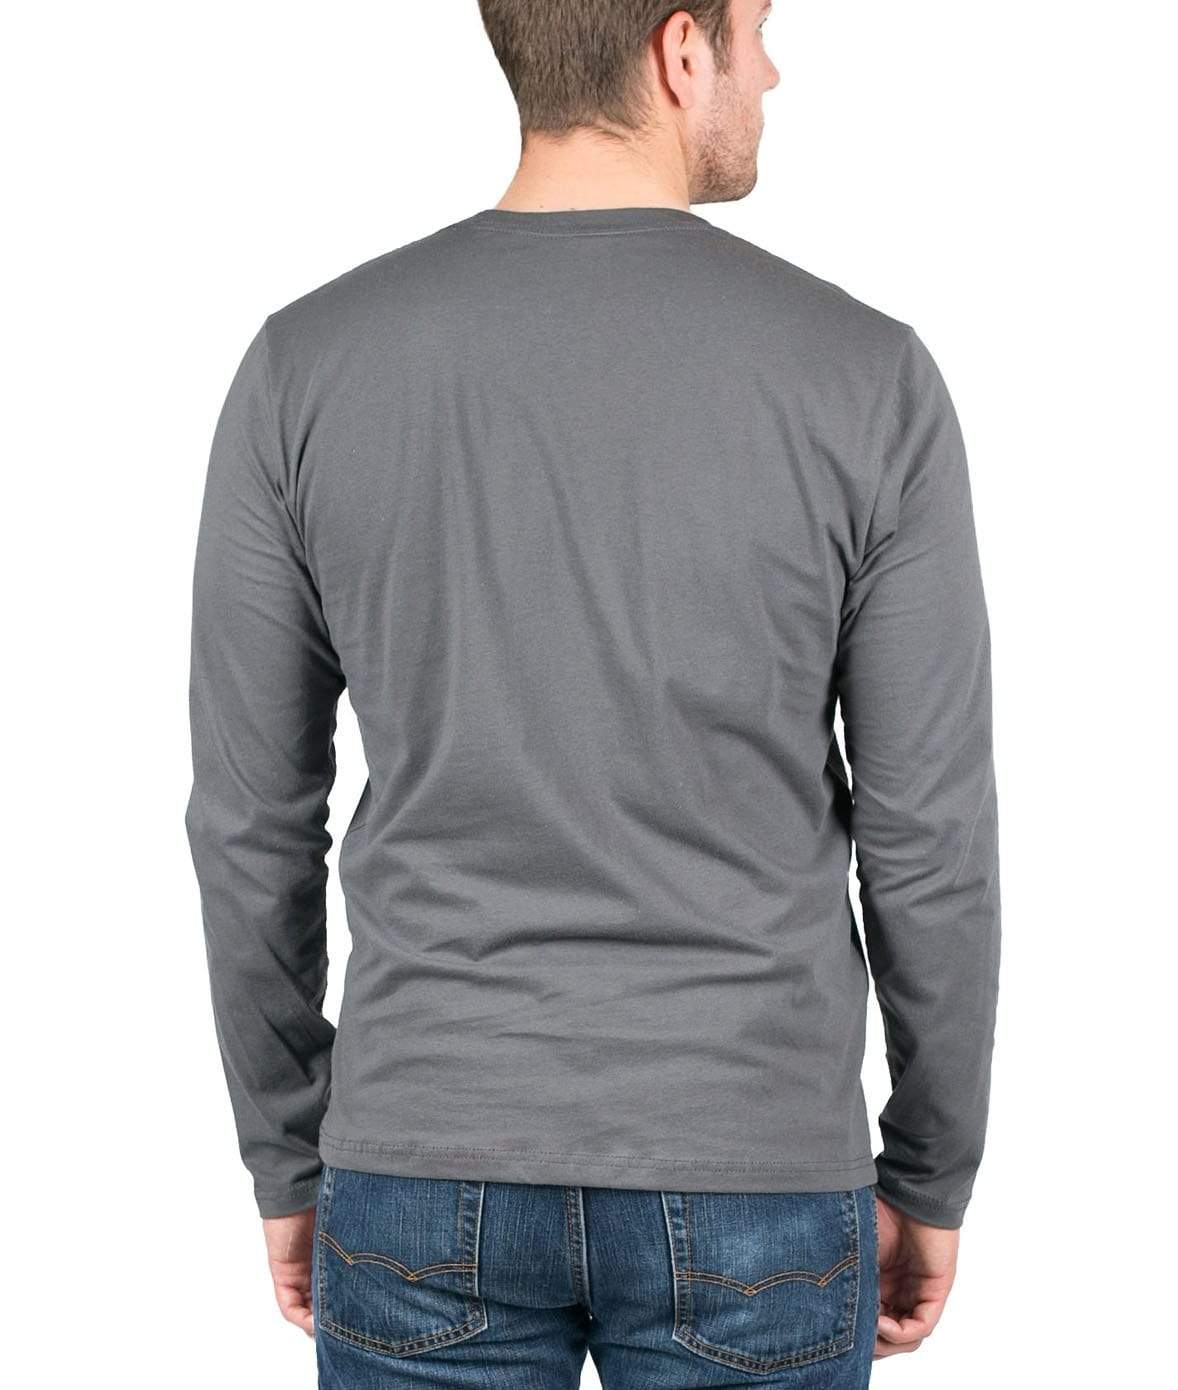 Soft Sleeve 100% Cotton T-Shirt - Nayked Apparel